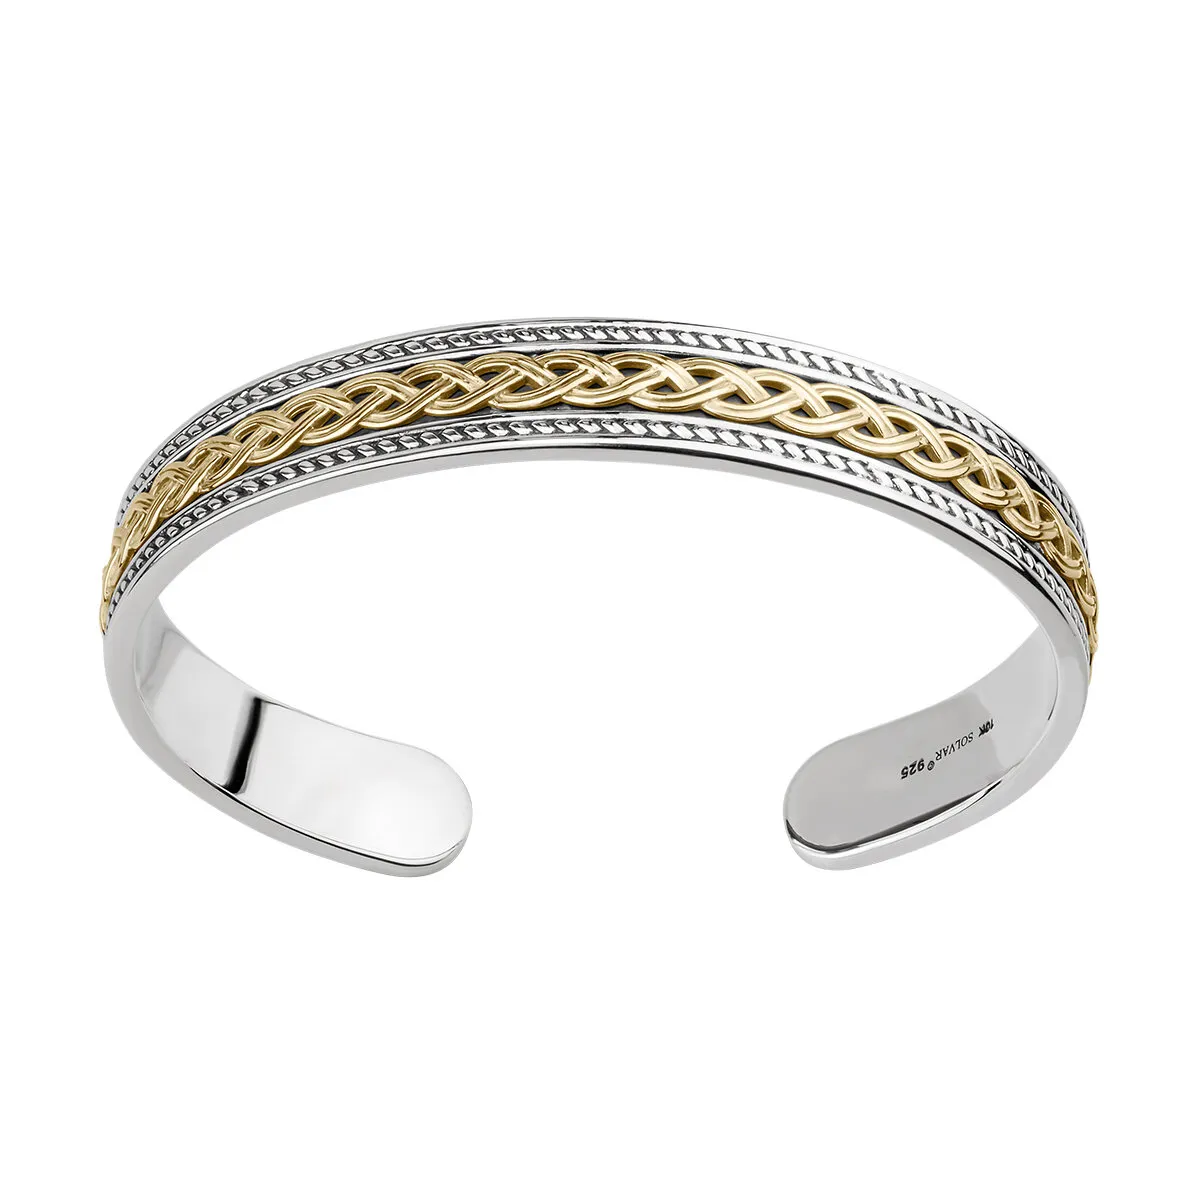 Gents 10k Gold and Silver Celtic Knot Bangle